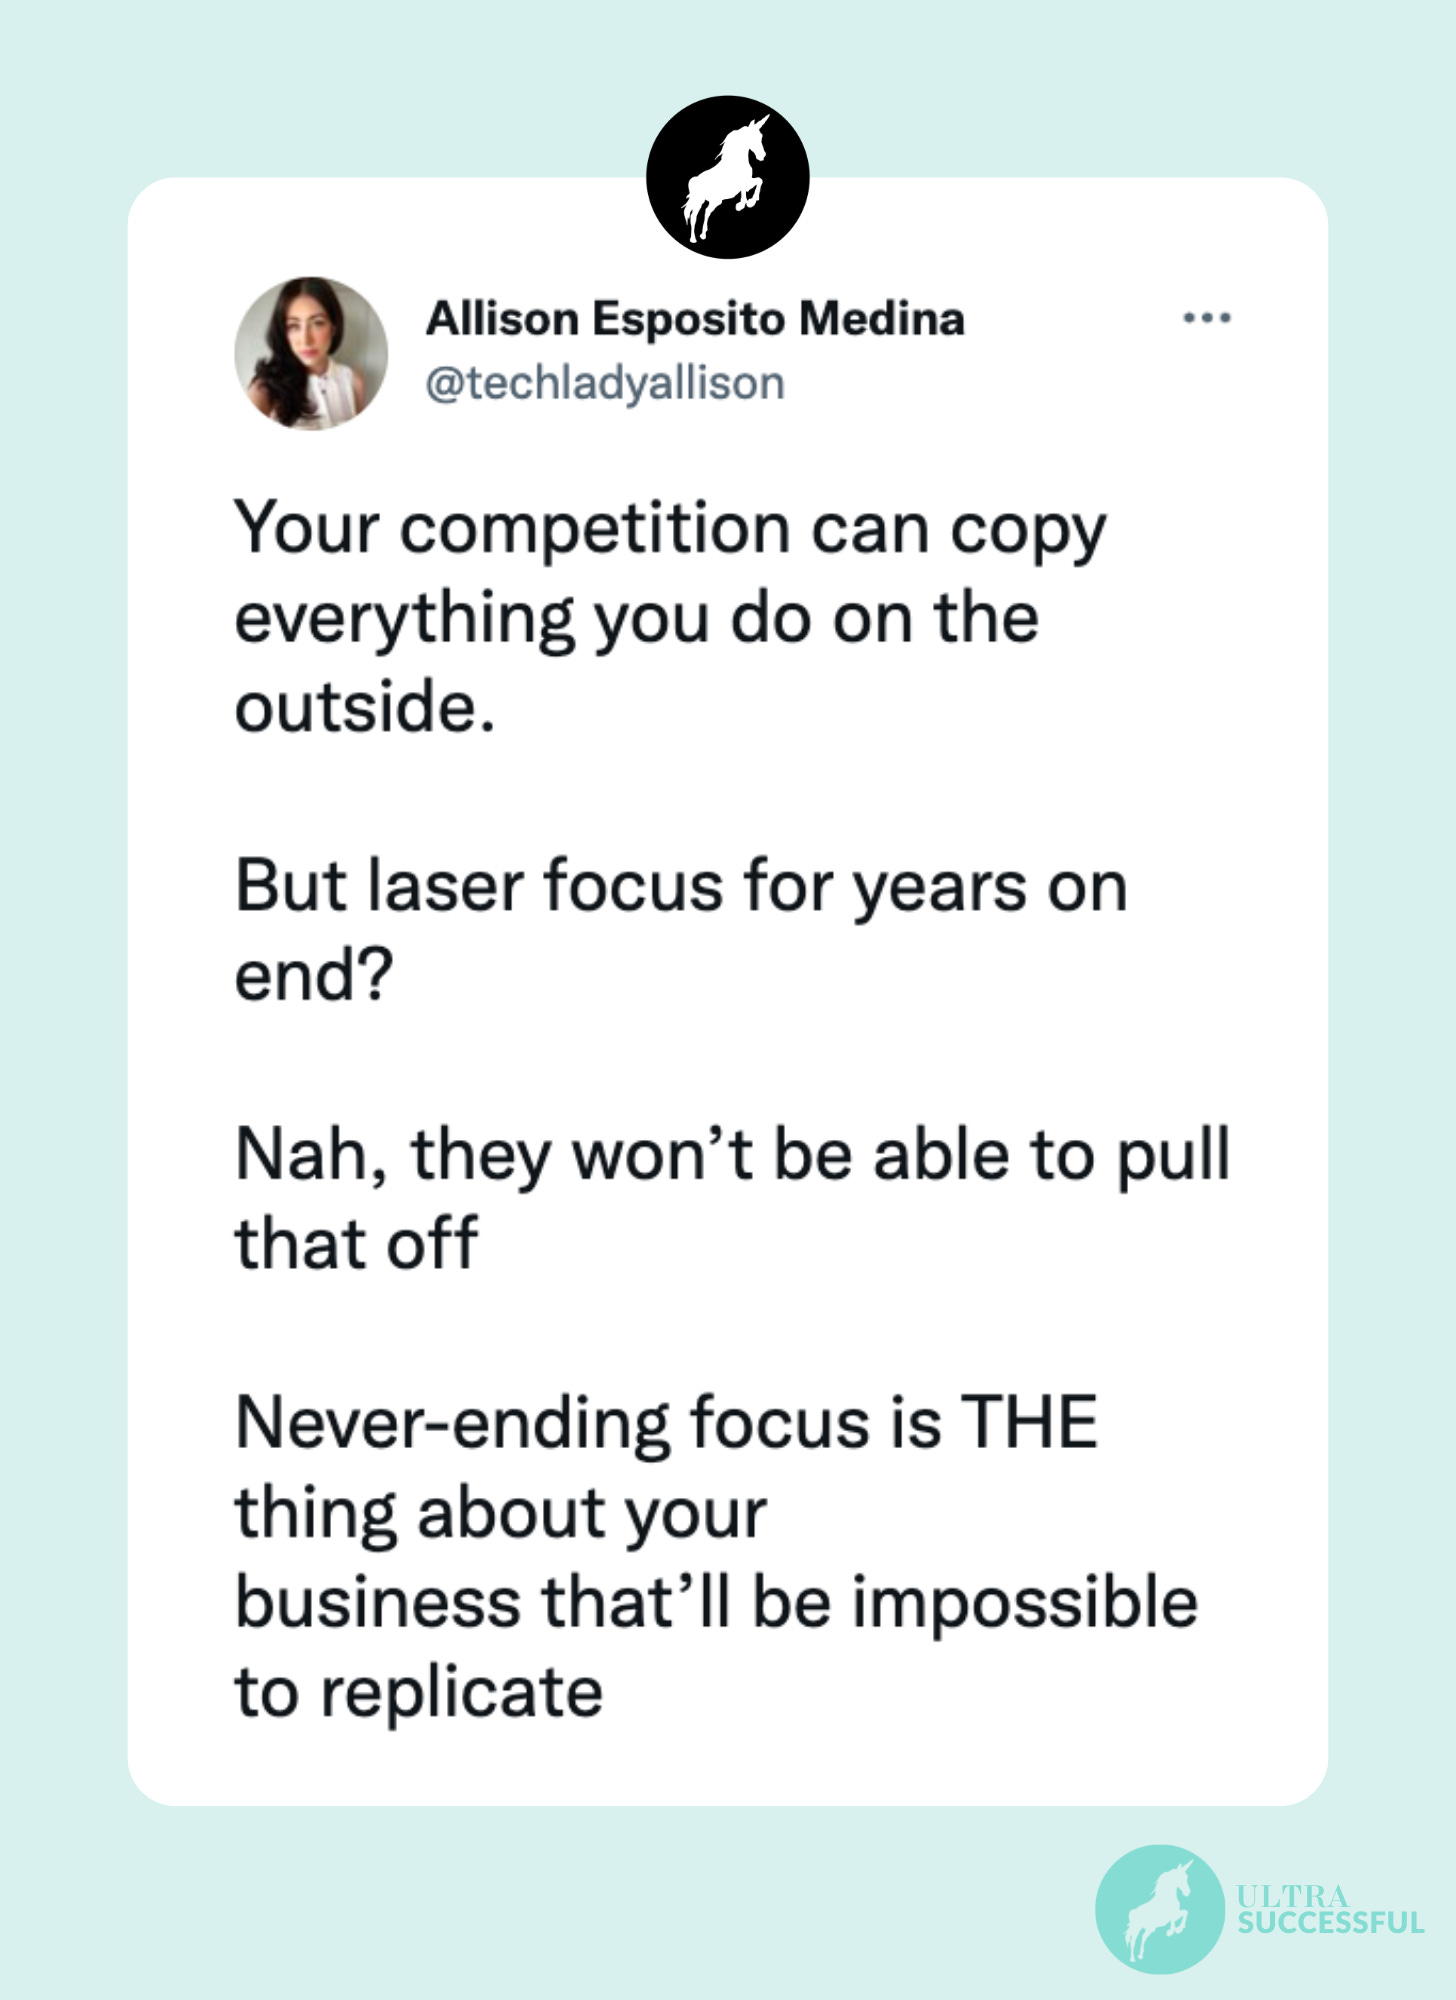 @techladyallison: Your competition can copy everything you do on the outside.   But laser focus for years on end?   Nah, they won’t be able to pull that off  Never-ending focus is THE thing about your  business that’ll be impossible to replicate